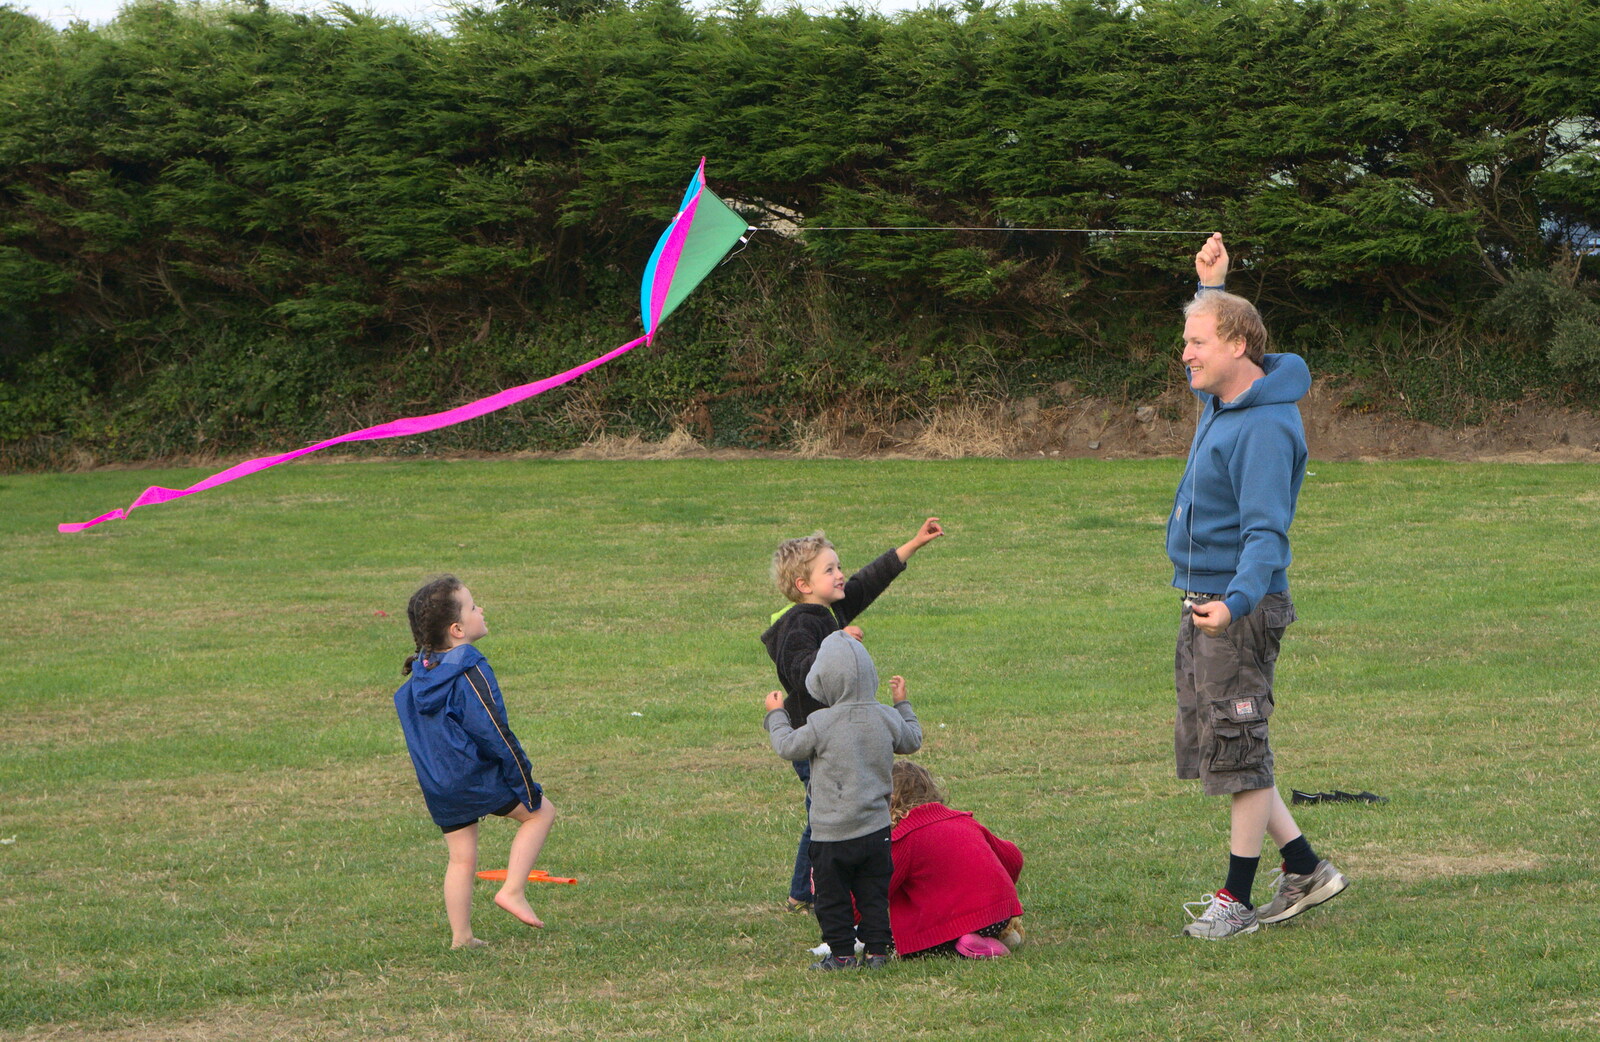 The neighbour does some kite flying from Camping at Silver Strand, Wicklow, County Wicklow, Ireland - 7th August 2014